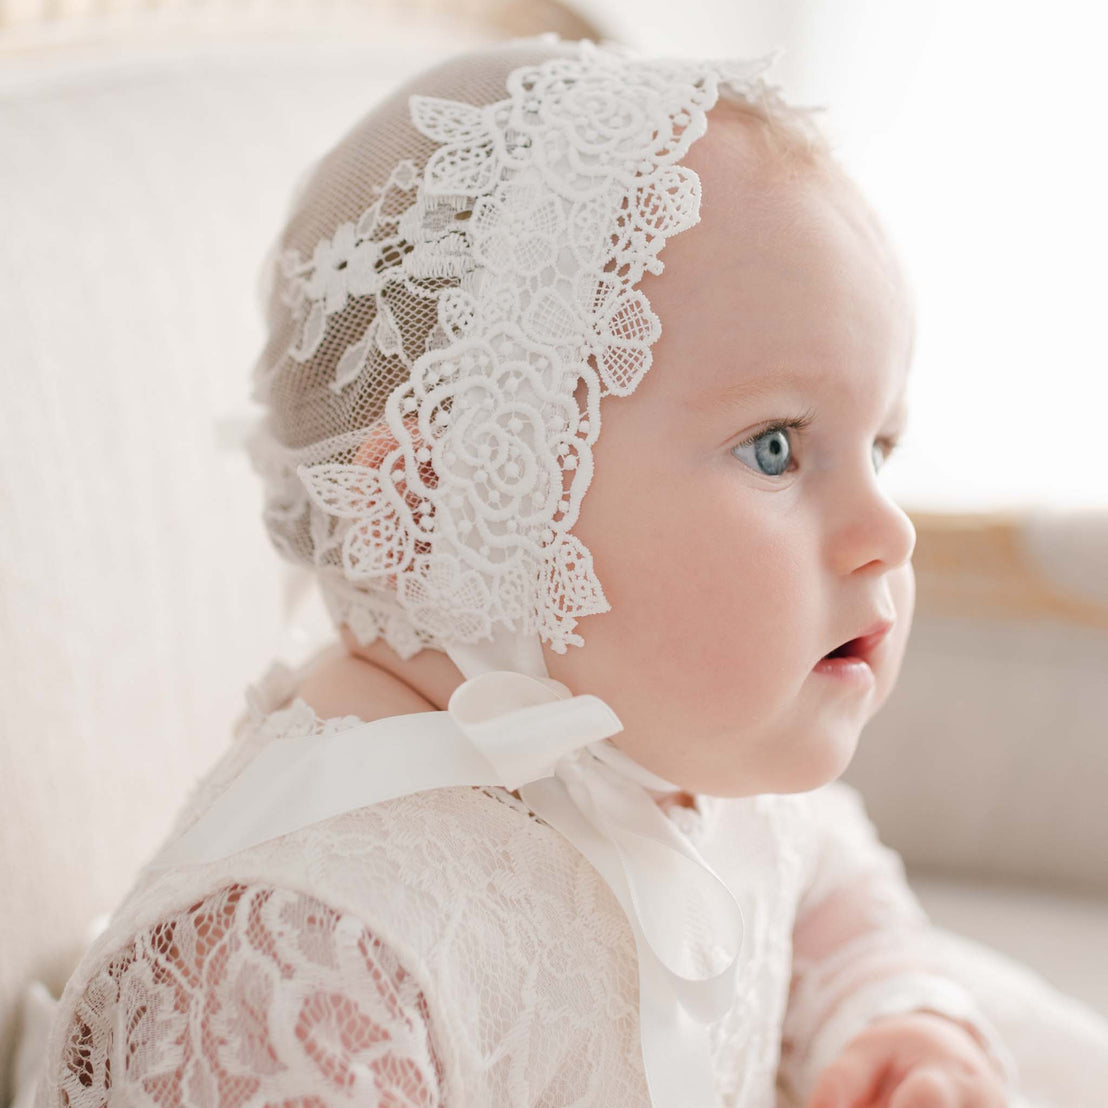 A baby with blue eyes and light skin wearing the Juliette Christening Gown & Bonnet, gazing to the side in a softly lit room.